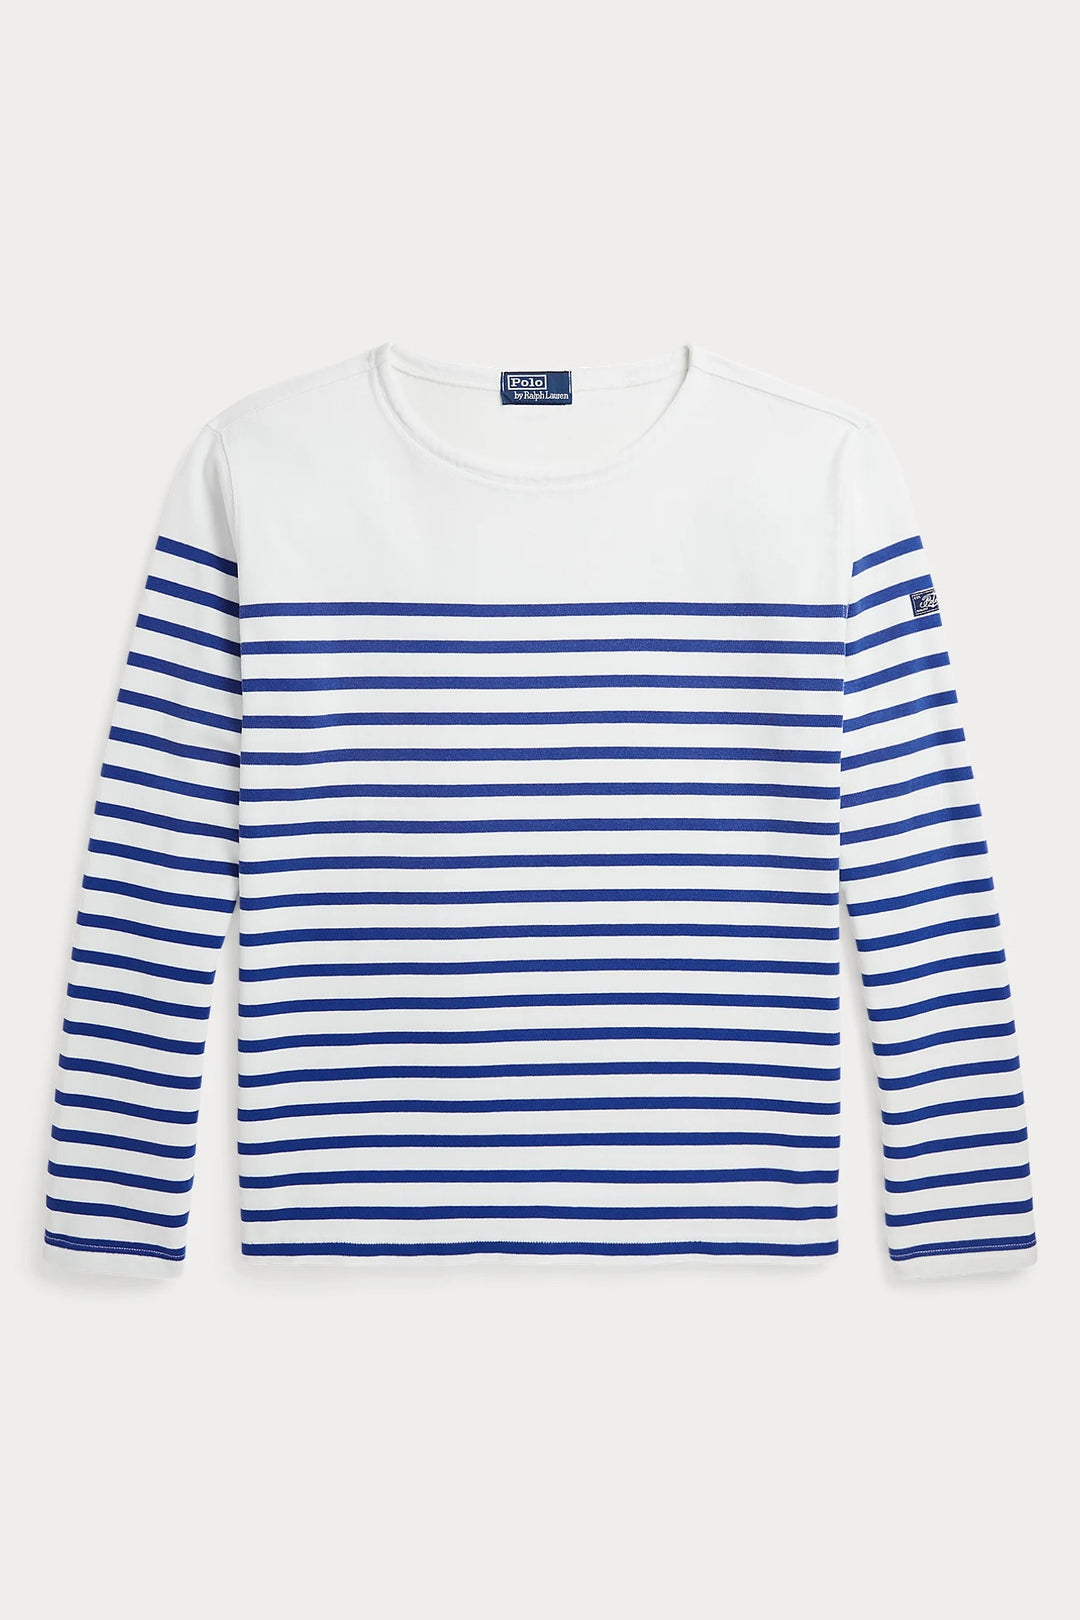 POLO RALPH LAUREN - Classic Fit Striped Boatneck Shirt - Dale